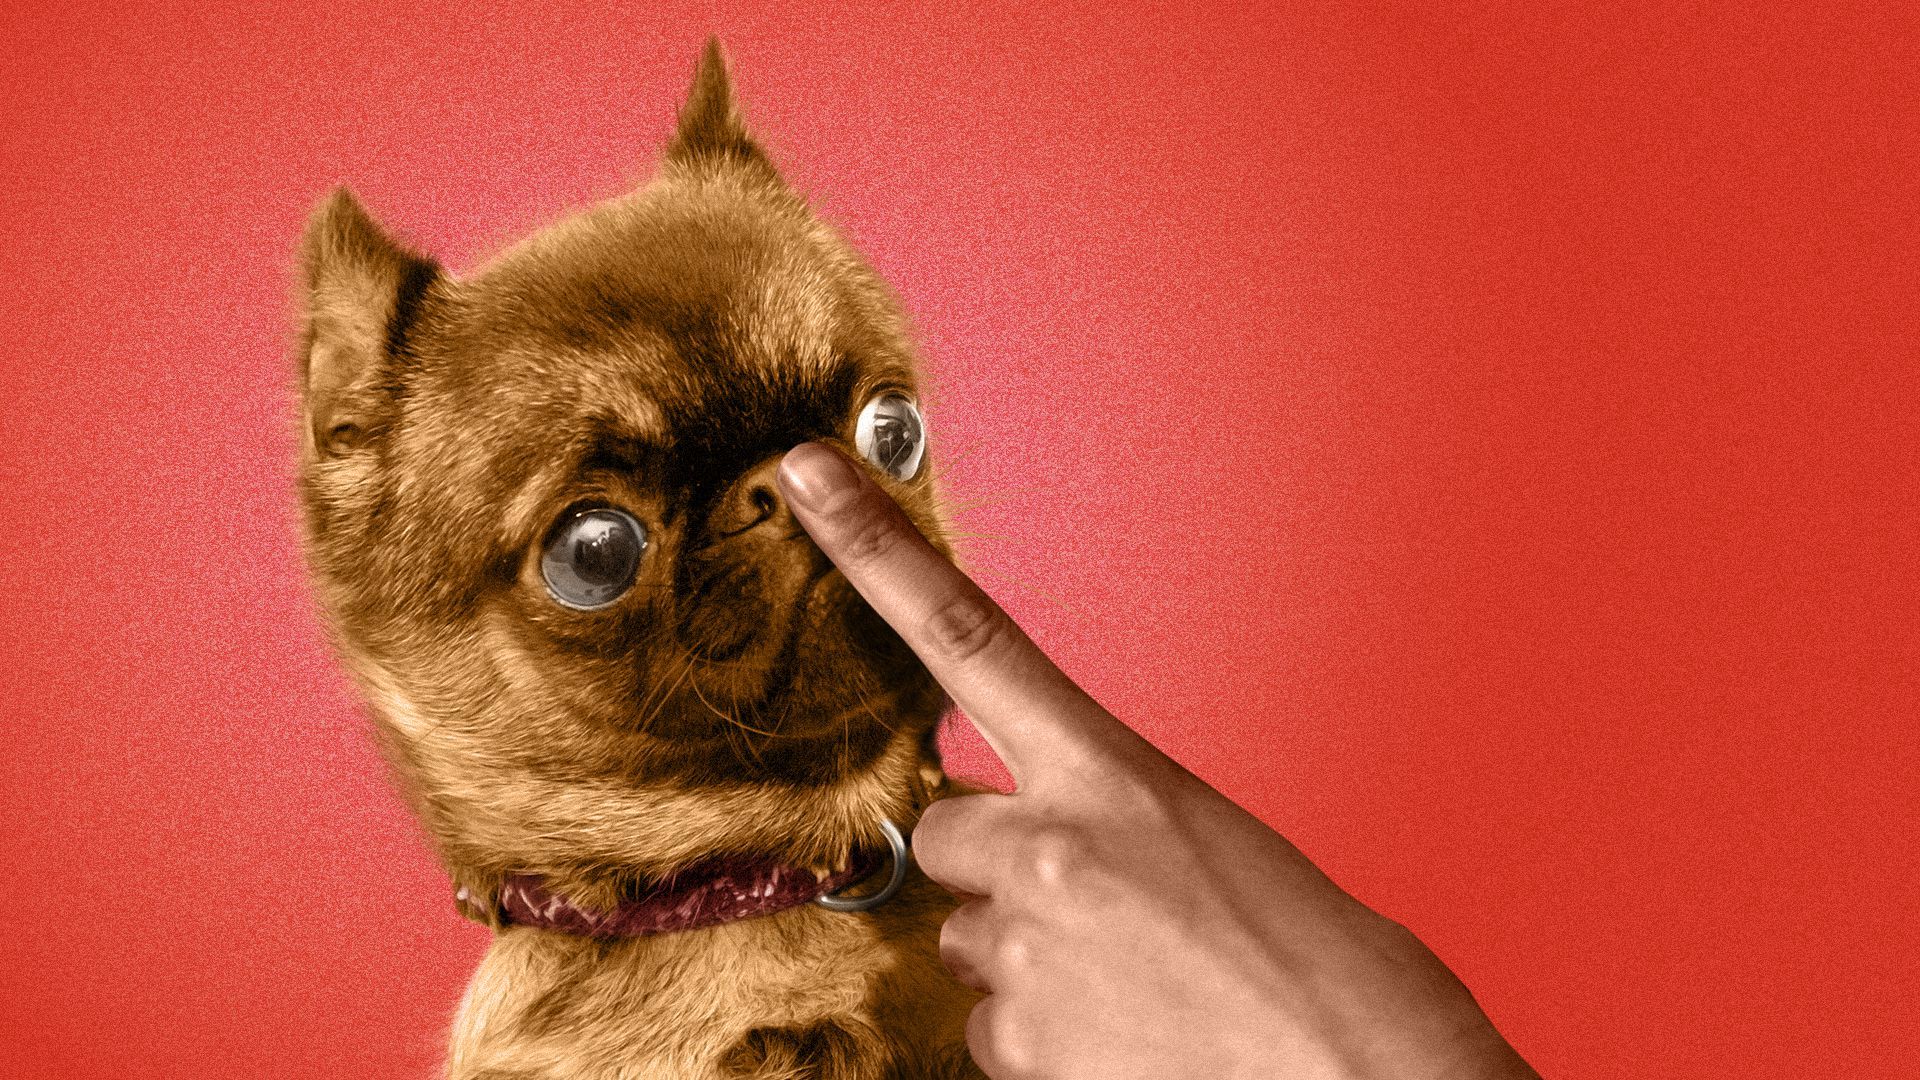 Illustration of a dog being shushed with a finger to his snout.